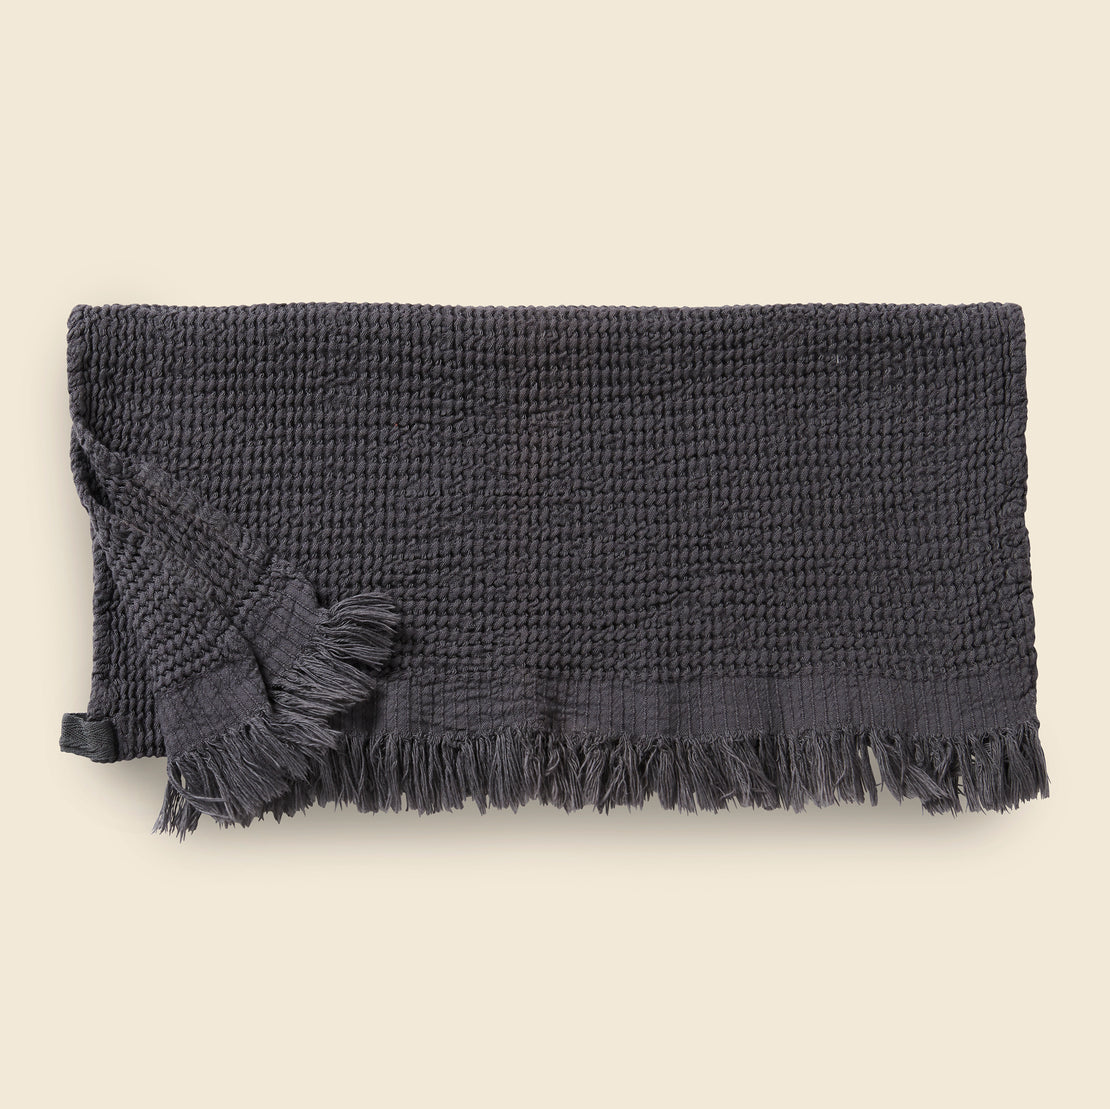 Anthracite Ella Hand Towel - Home - STAG Provisions - Home - Bath - Towel